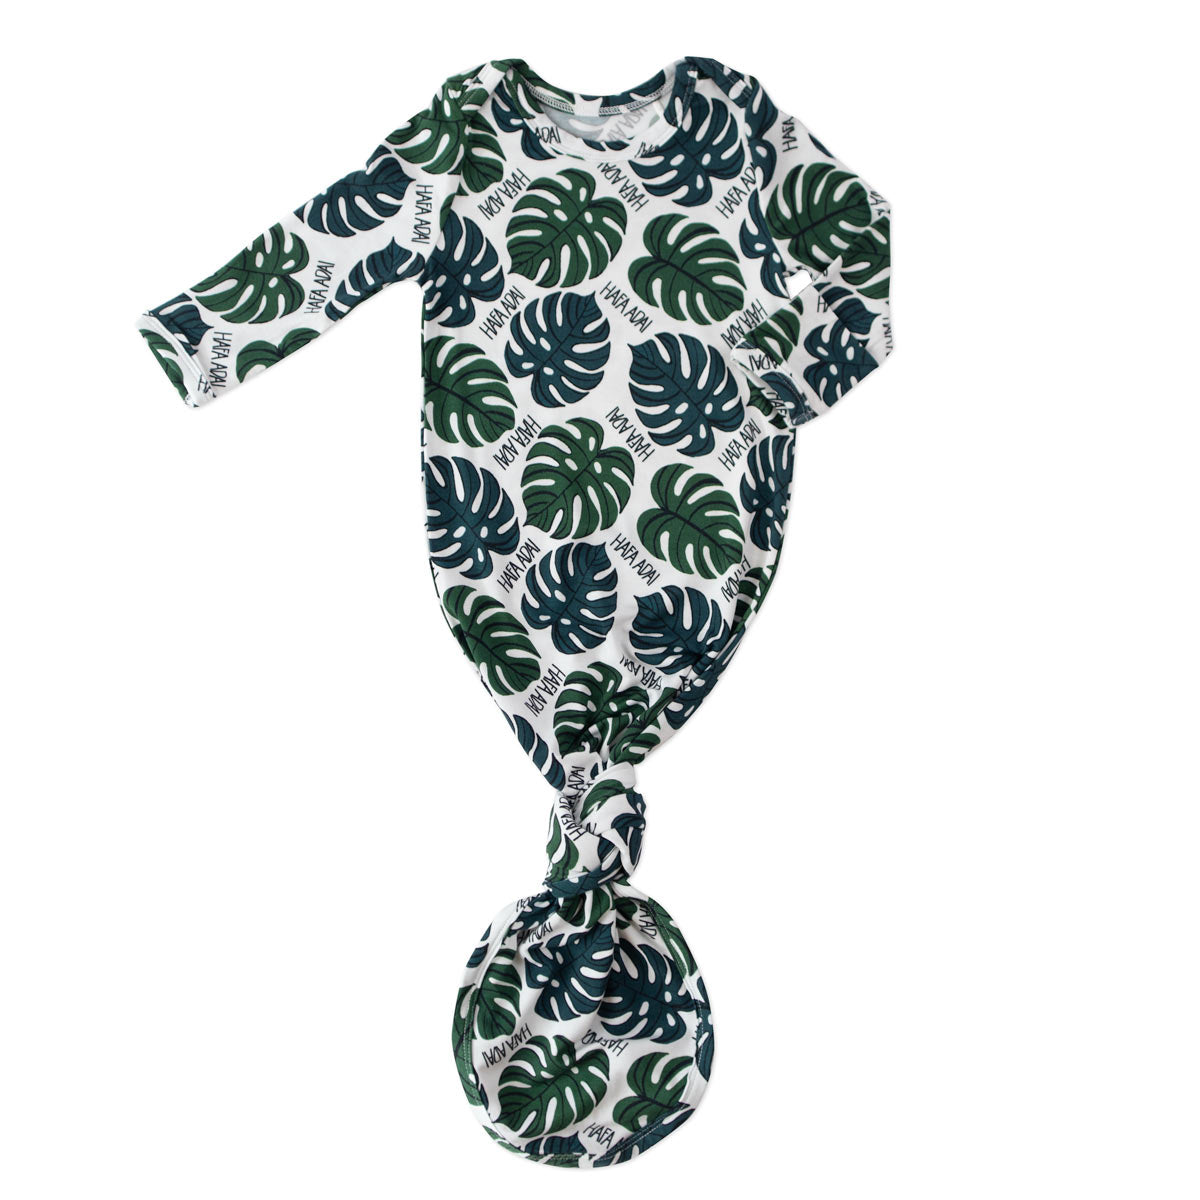 Hafa Adai Monstera infant knotted gown